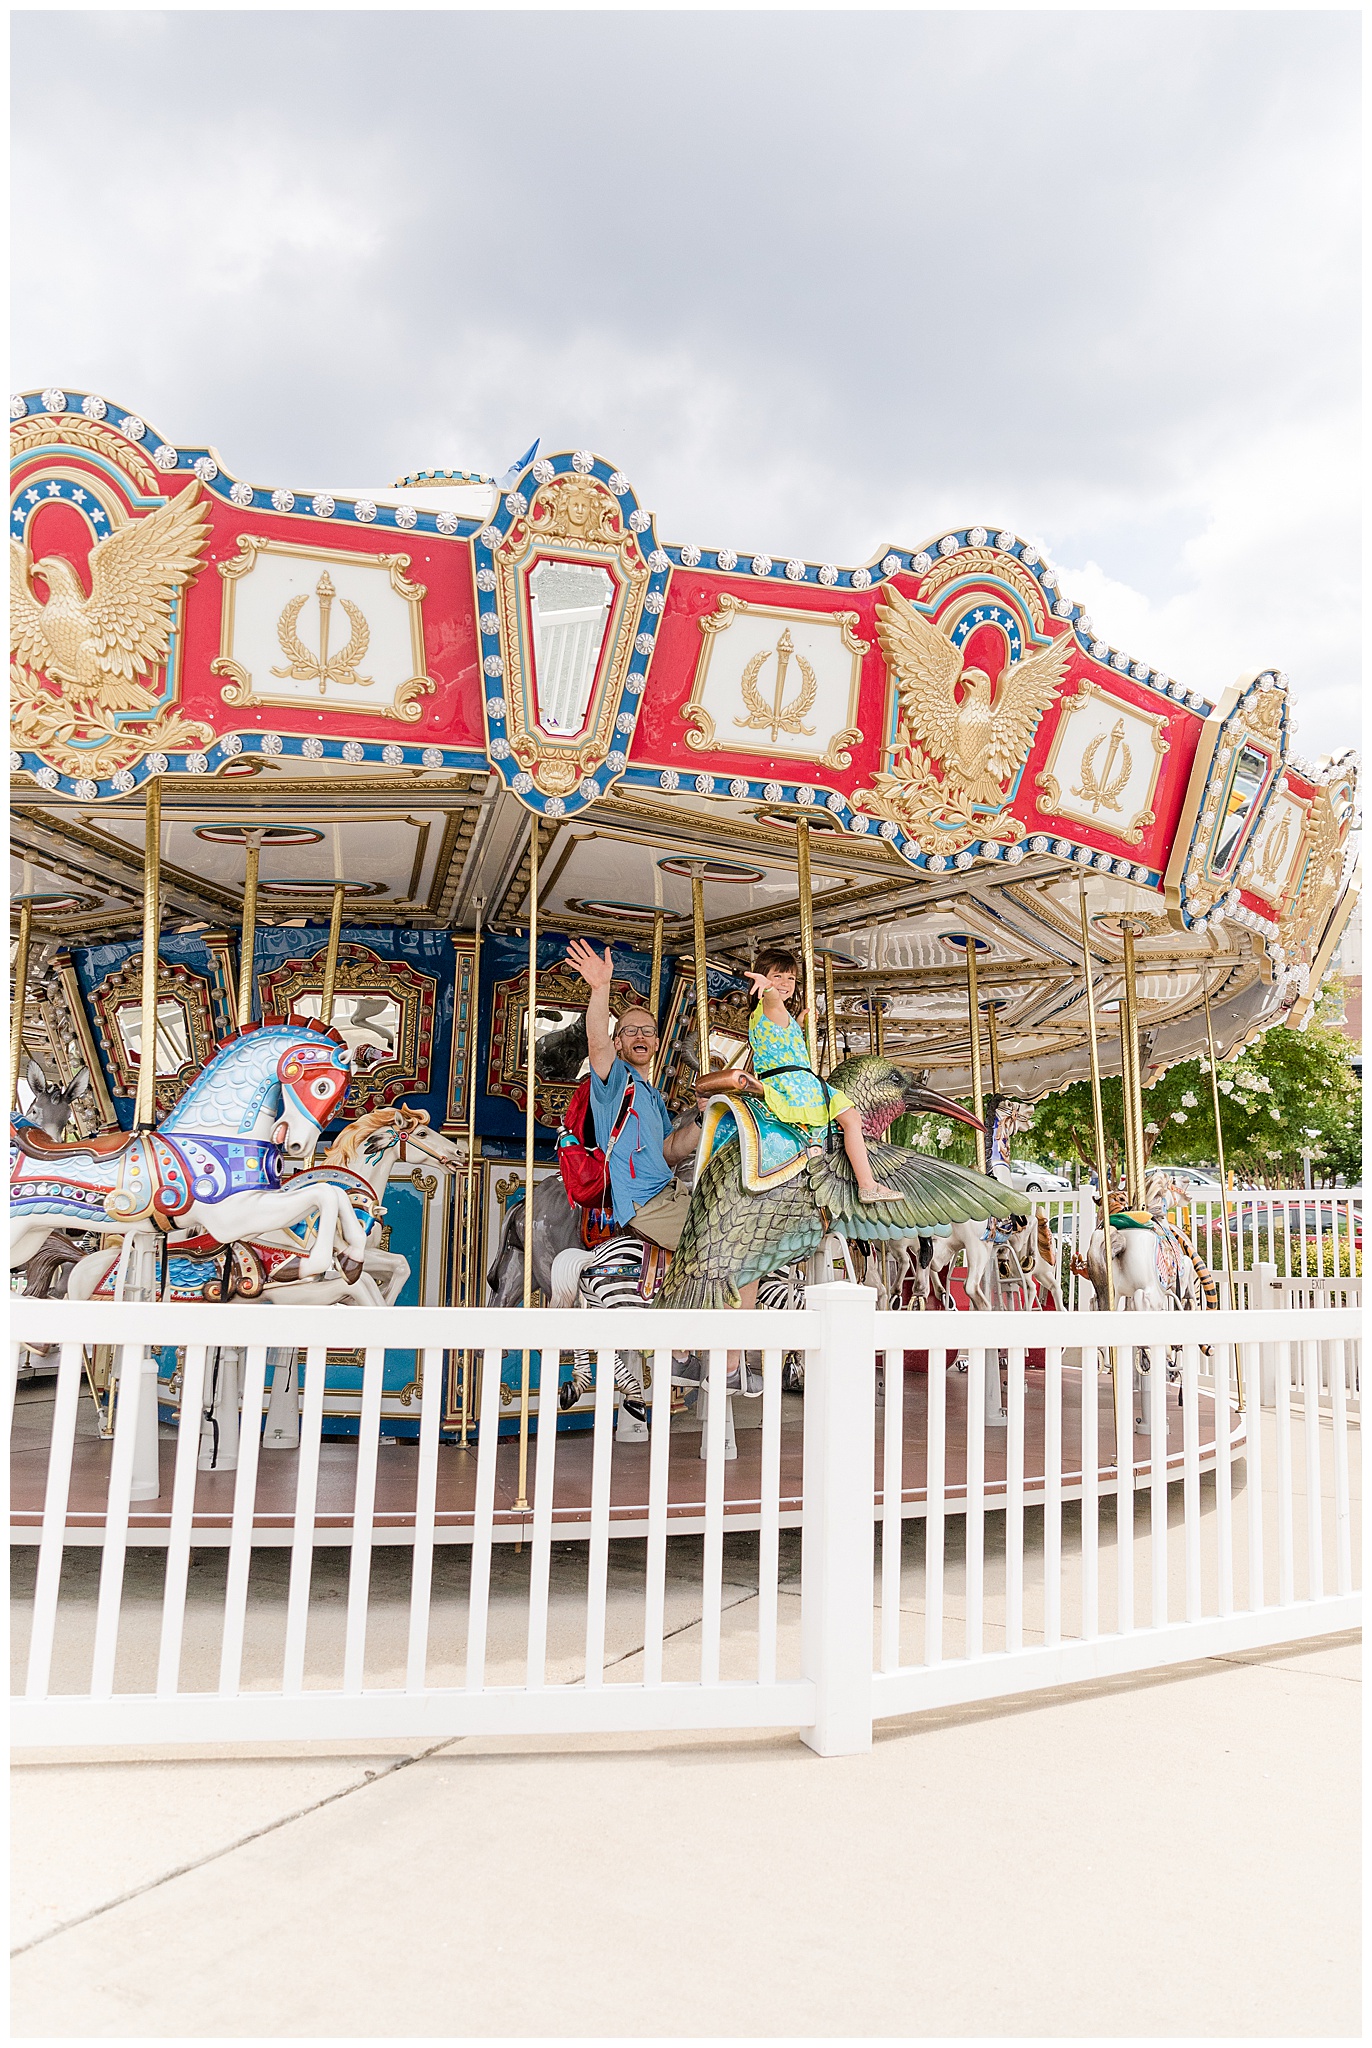 Carousel Photos by Bethany M. Brasfield Kofmehl